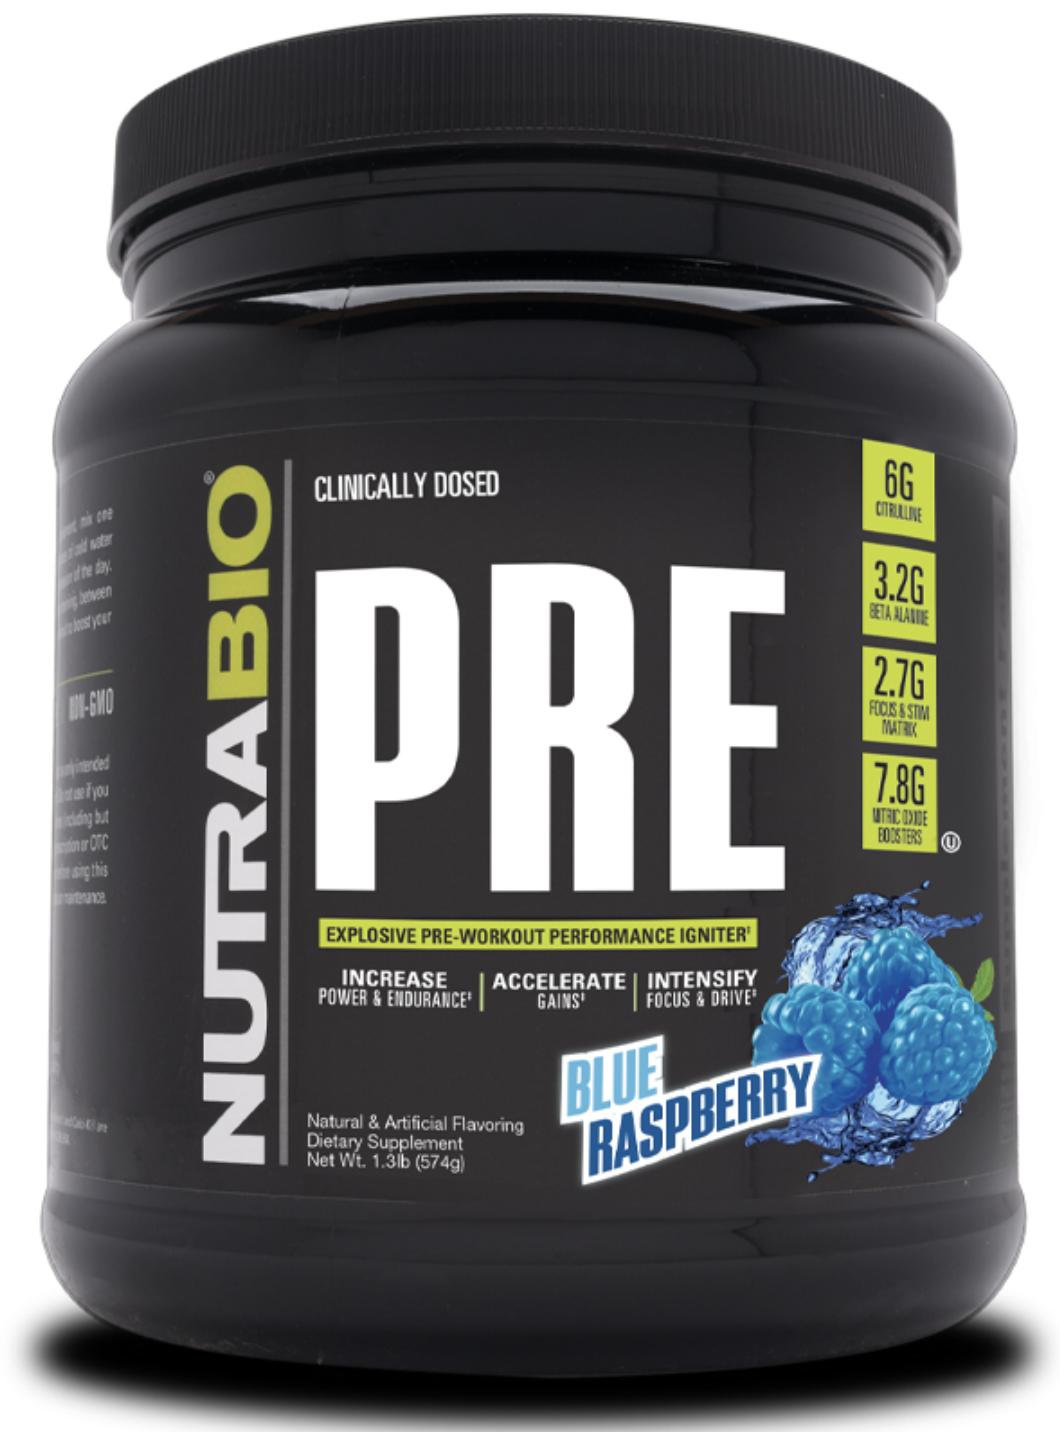 30 Minute Concept Pre Workout Reviews for Build Muscle